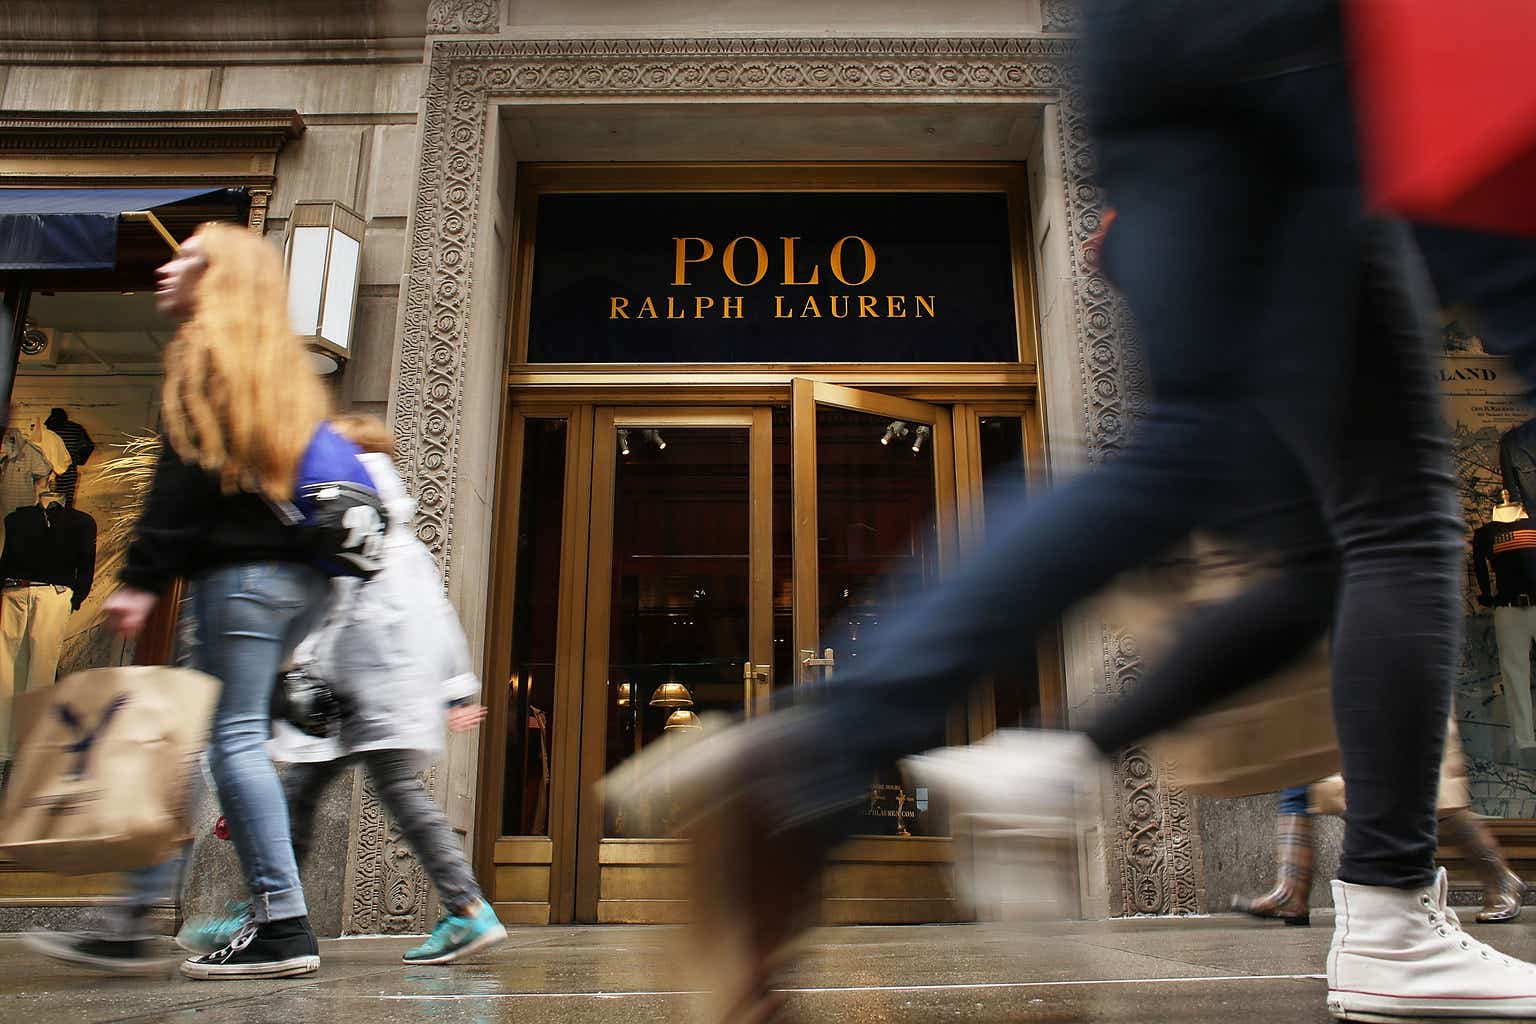 Ralph Lauren: An Iconic Fashion Brand Returns To Growth (NYSE:RL